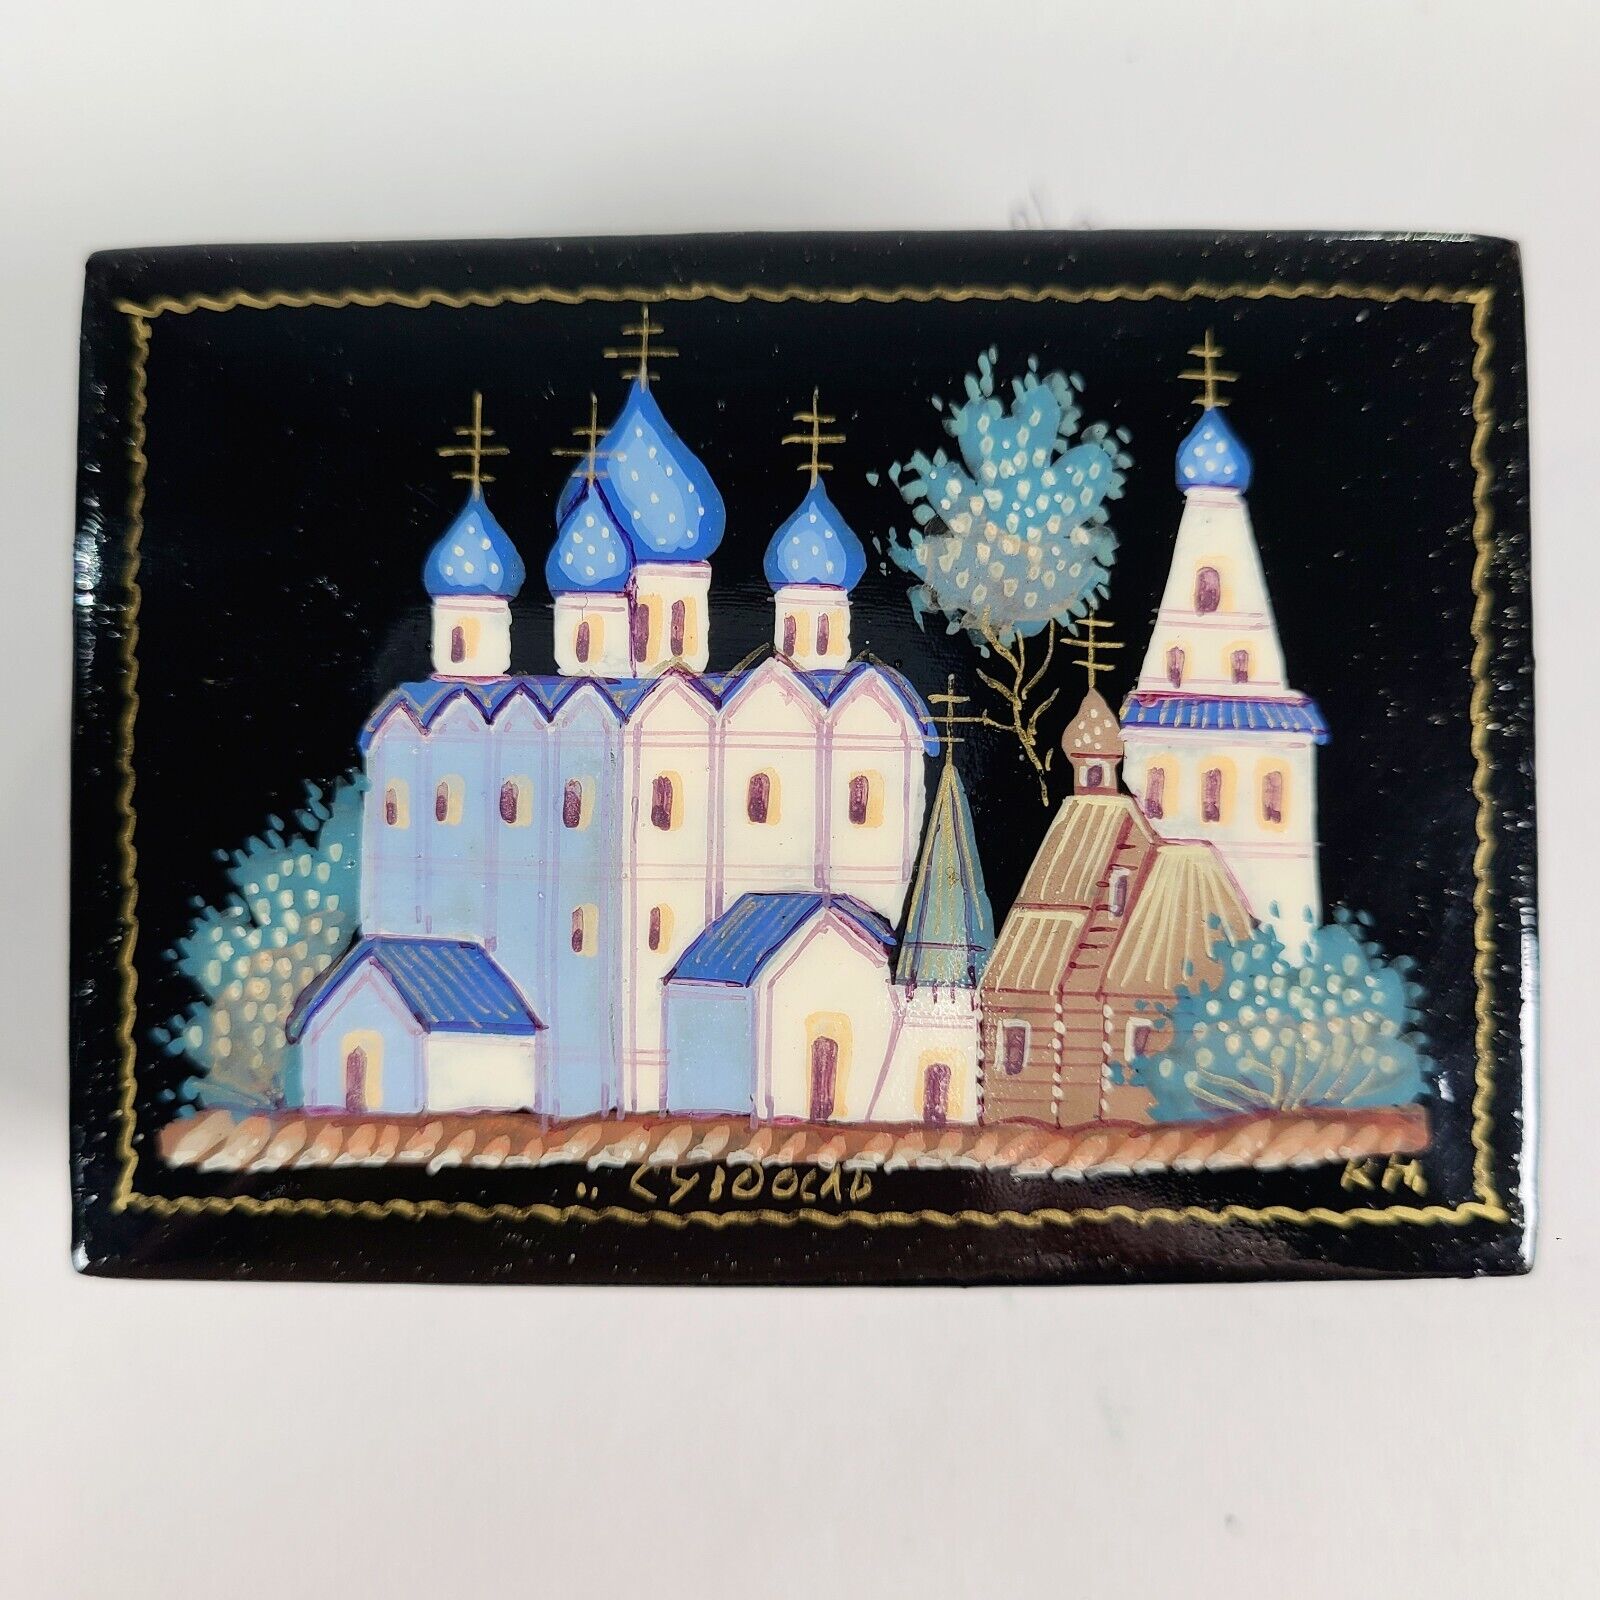 Vintage Handpainted Russian Lacquer Box Signed Beautiful Churches Details Black